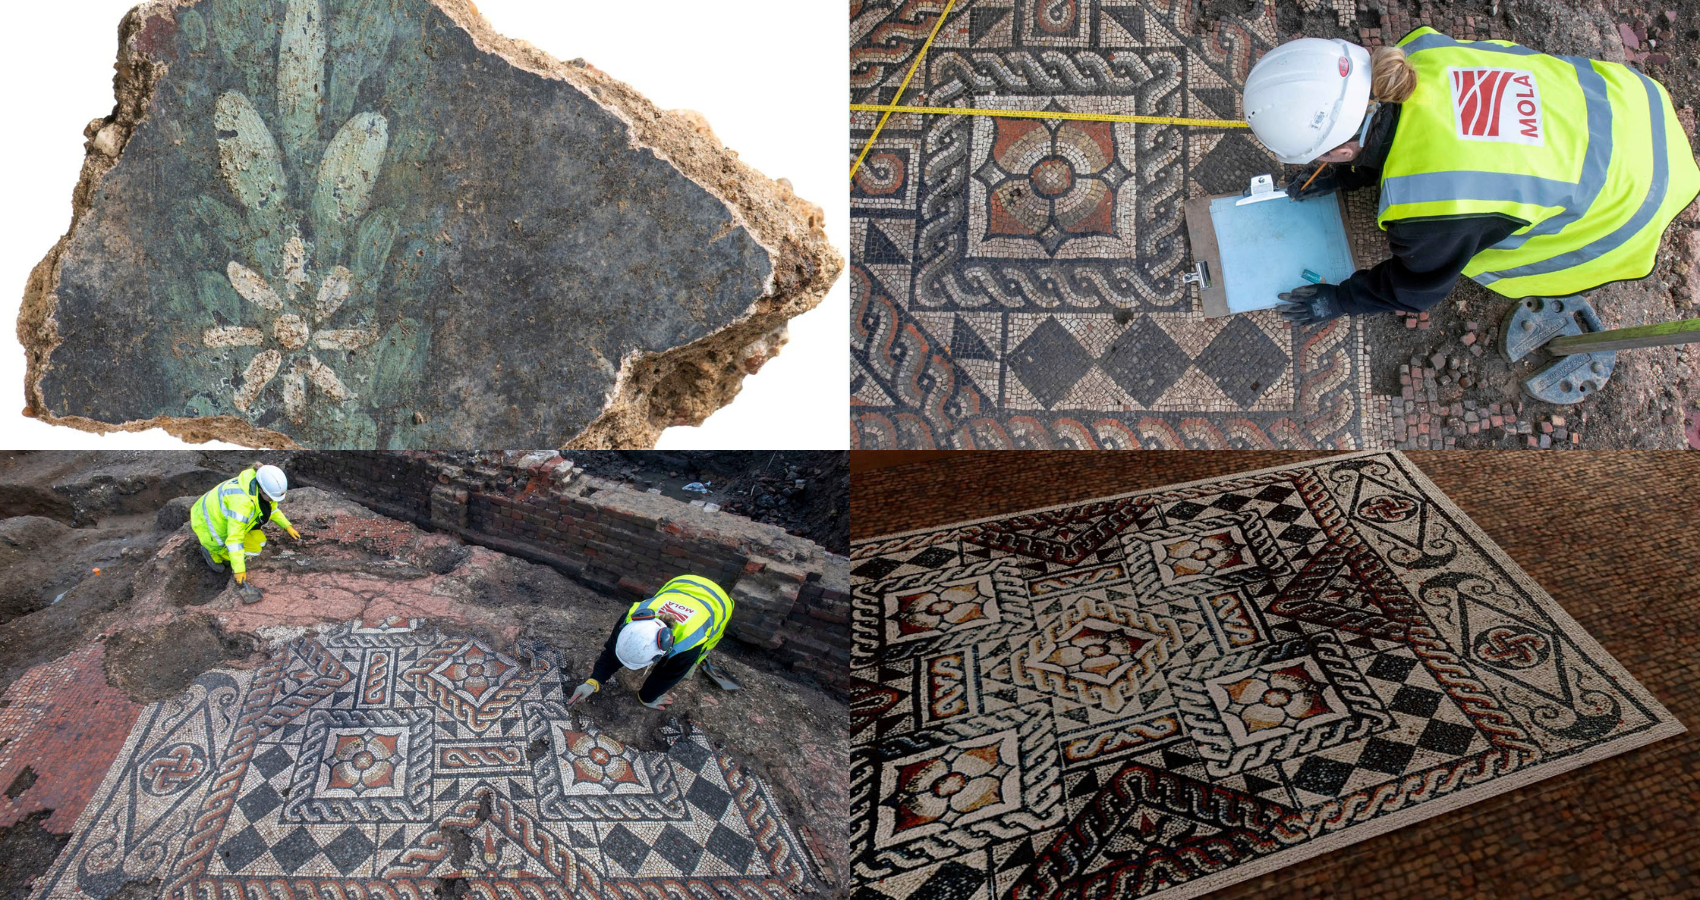 Large Roman Mosaic Discovered in Central London